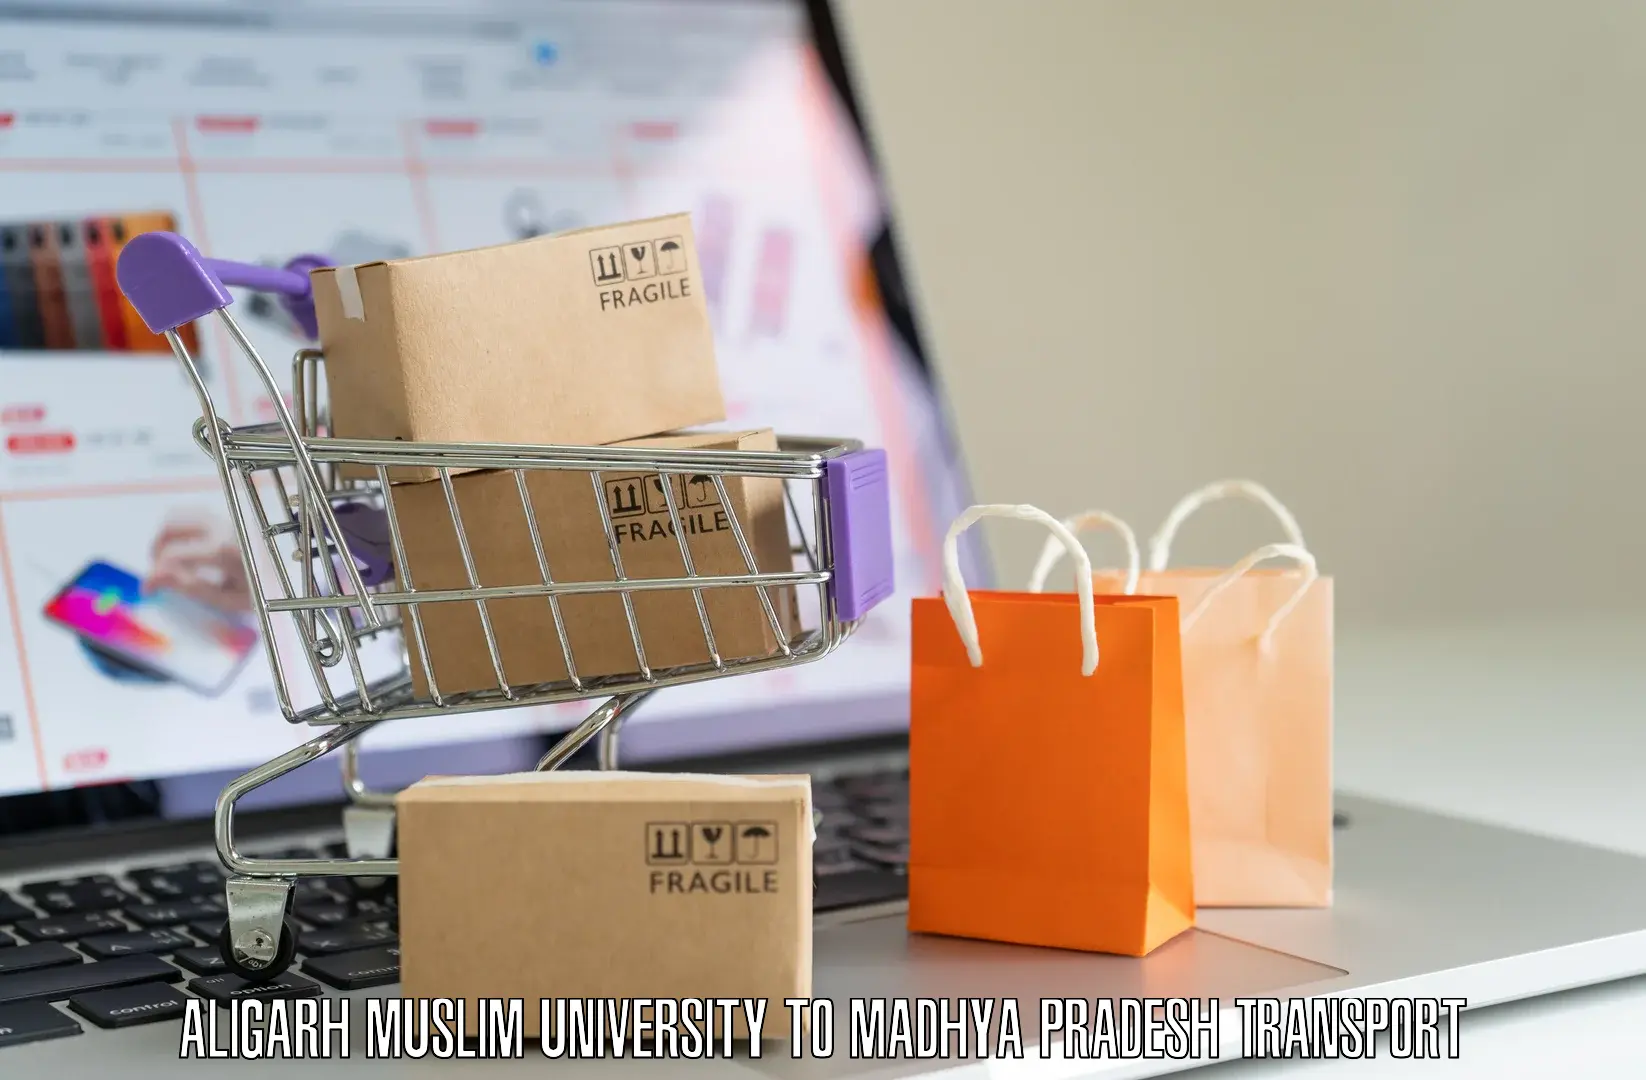 Air freight transport services Aligarh Muslim University to IIT Indore